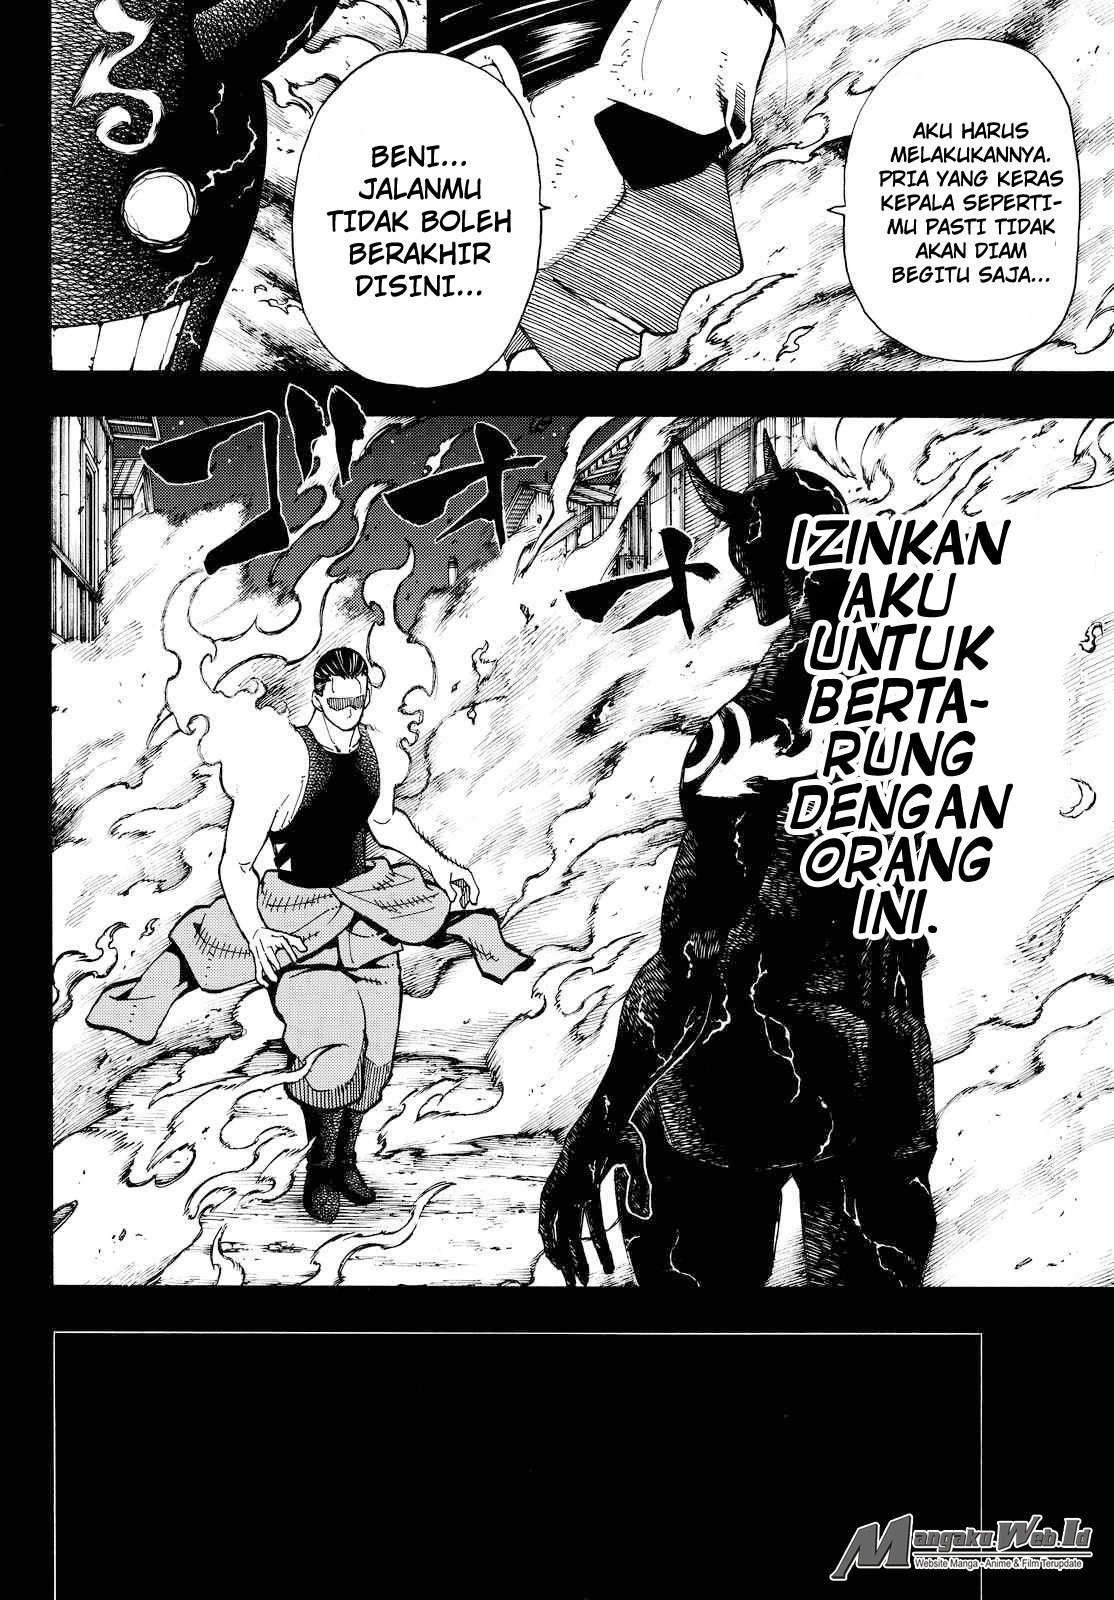 Fire Brigade of Flames Chapter 42-43